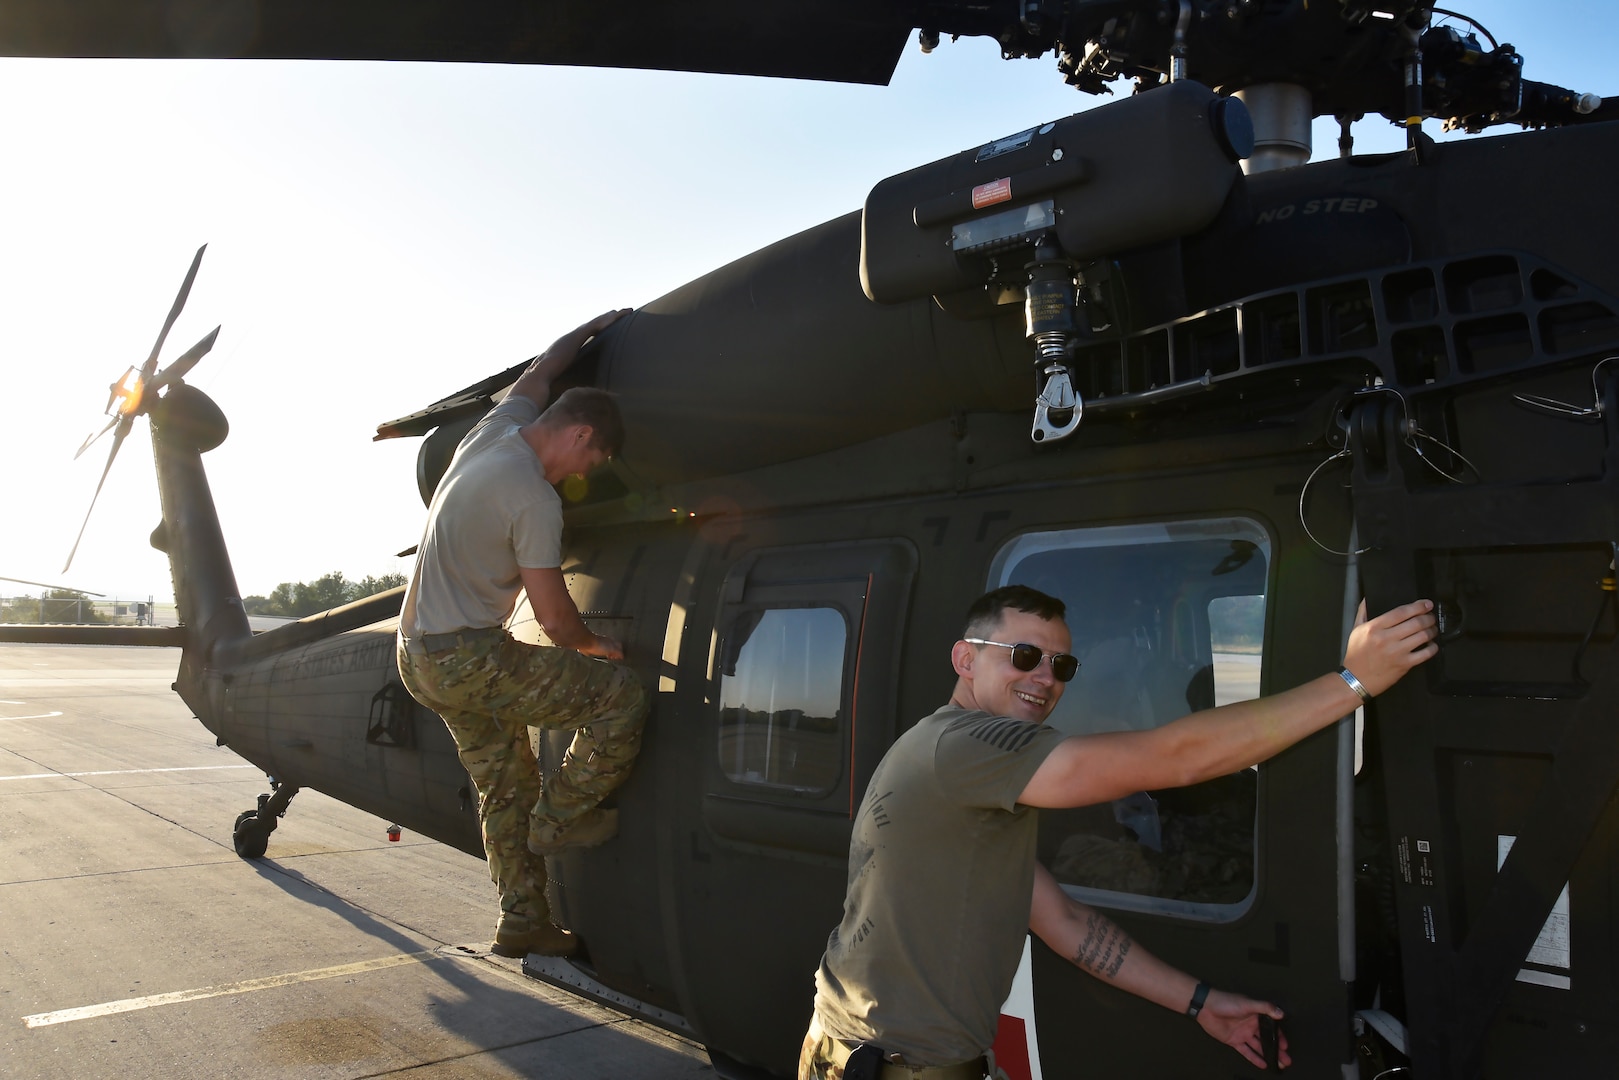 Approximately two dozen Soldiers assigned to medevac units at the Wisconsin National Guard's Army Aviation Support Facility 1 in West Bend, Wis., prep UH-60 Black Hawk helicopters Sept. 14, 2018,for movement to Maryland in response to then-Hurricane Florence, where the crews will remain in a standby status to be available in the event that civil authorities request their services. The Department of Defense began staging personnel, equipment and resources in the region to prepare for potential response missions as Hurricane Florence made landfall.